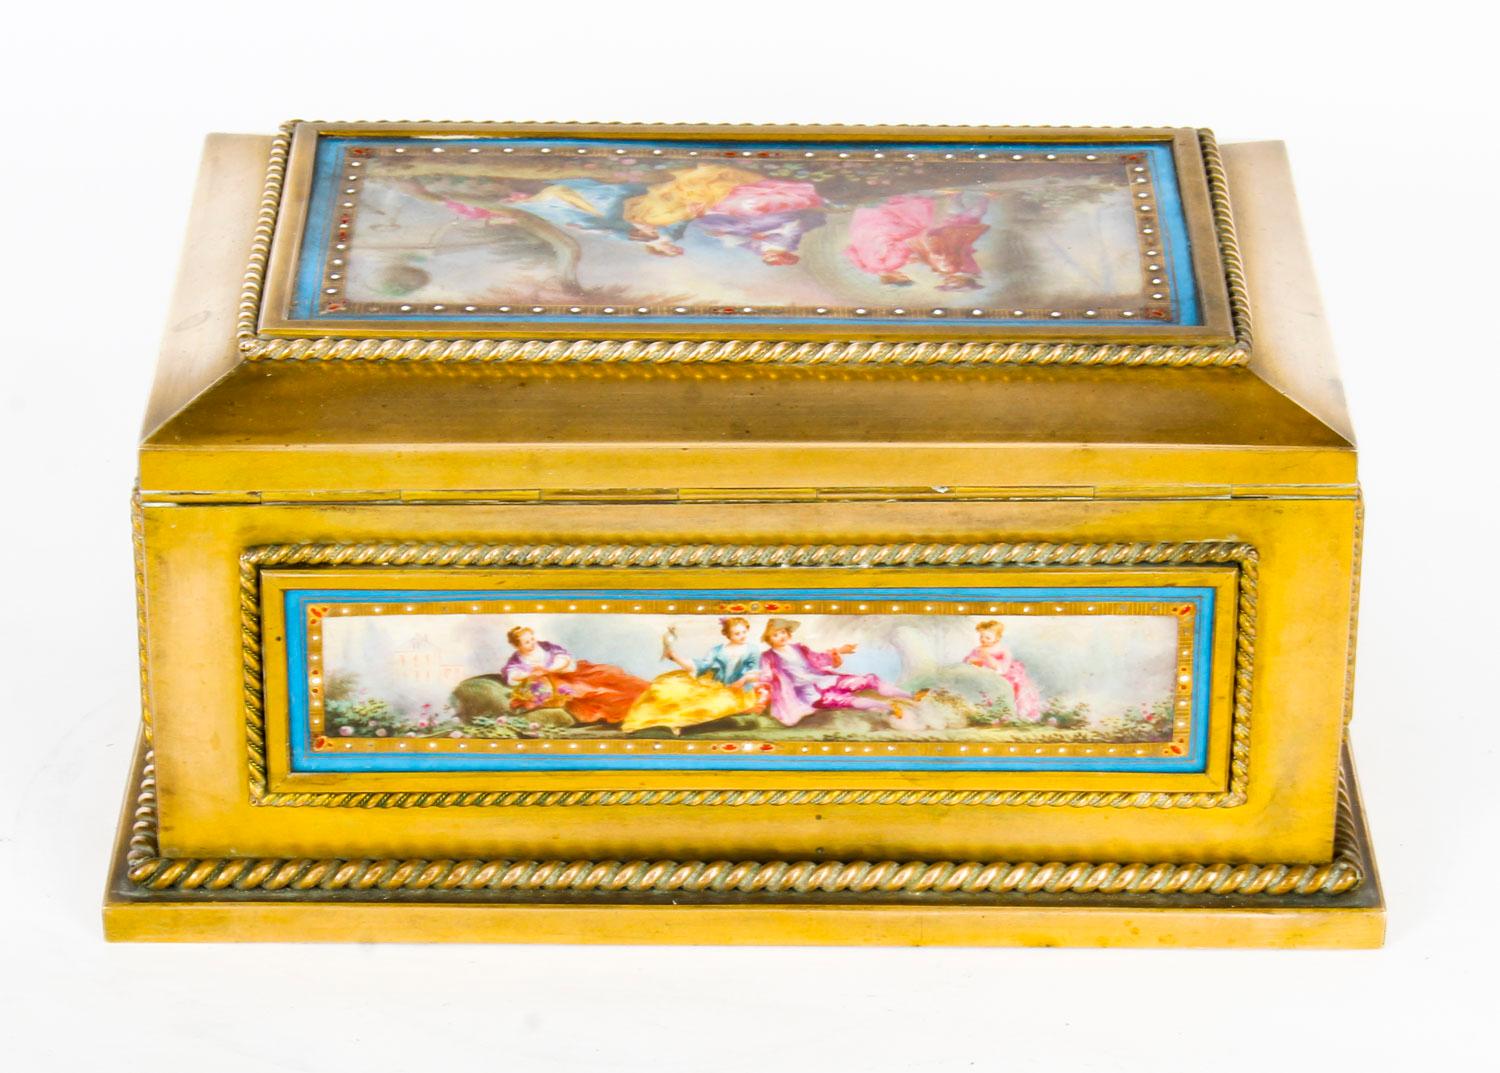 Antique French Ormolu and Sèvres Porcelain Jewelry Casket, 19th Century 6